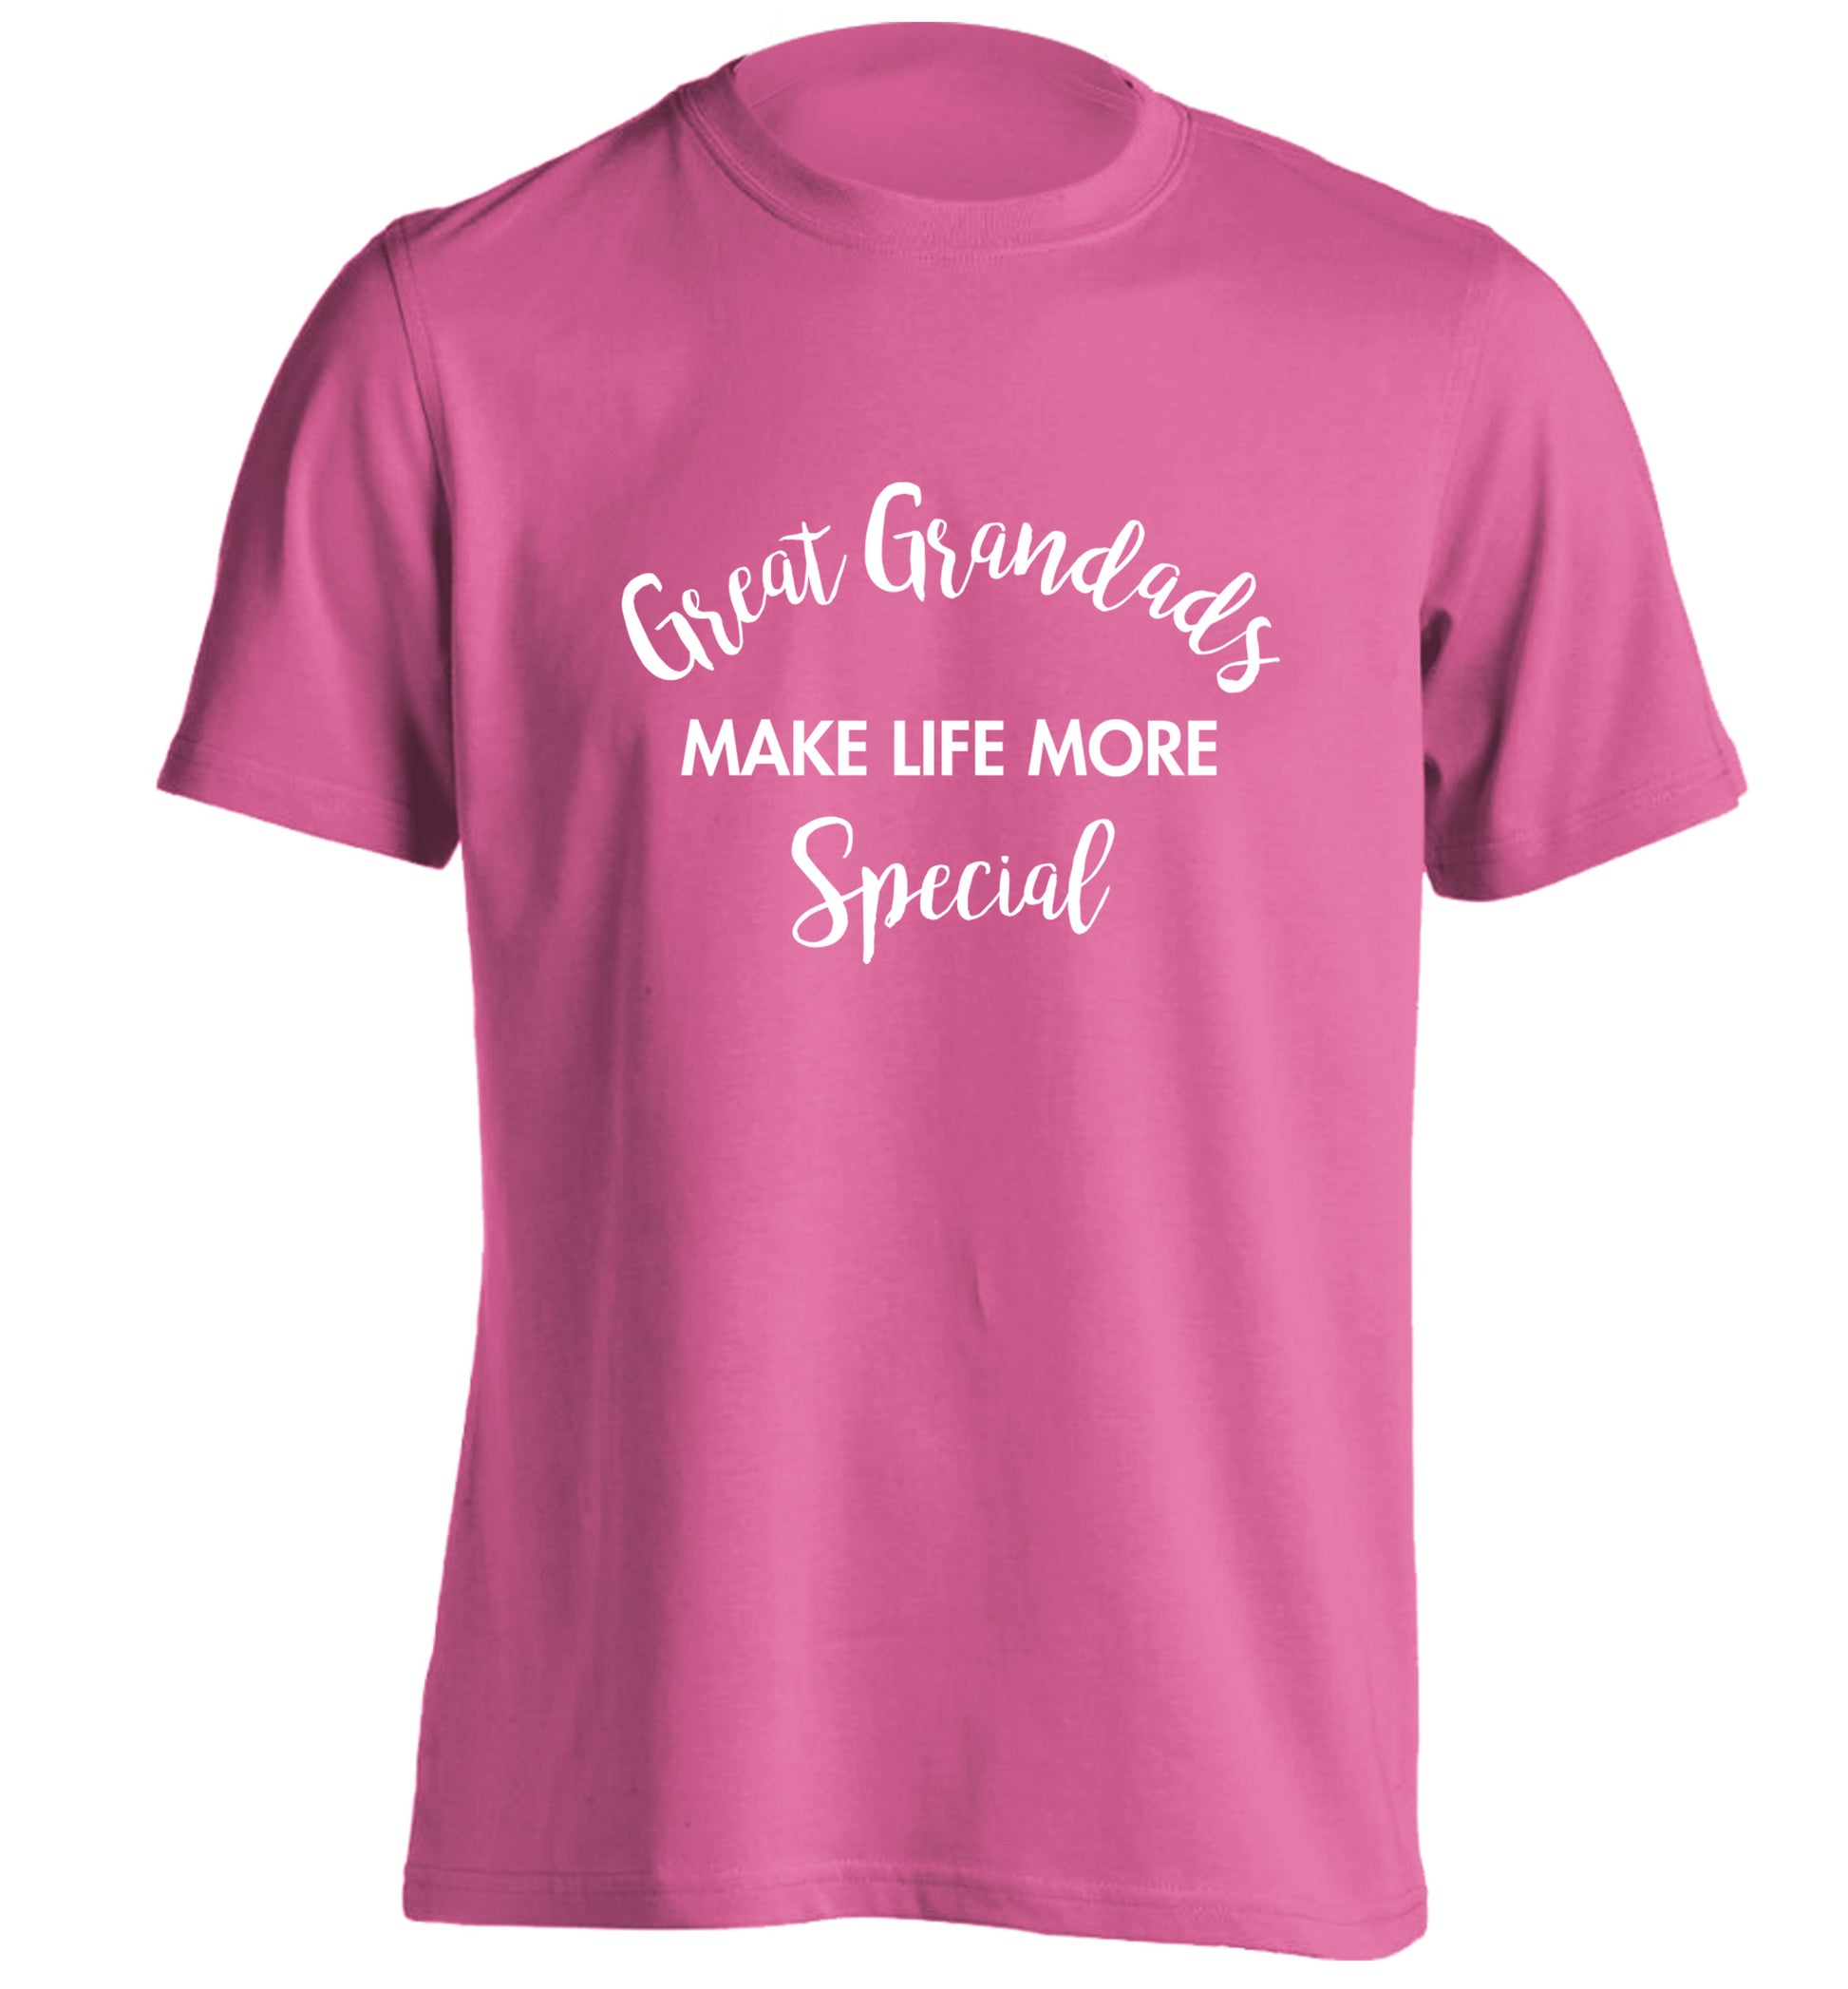 Great Grandads make life more special adults unisex pink Tshirt 2XL